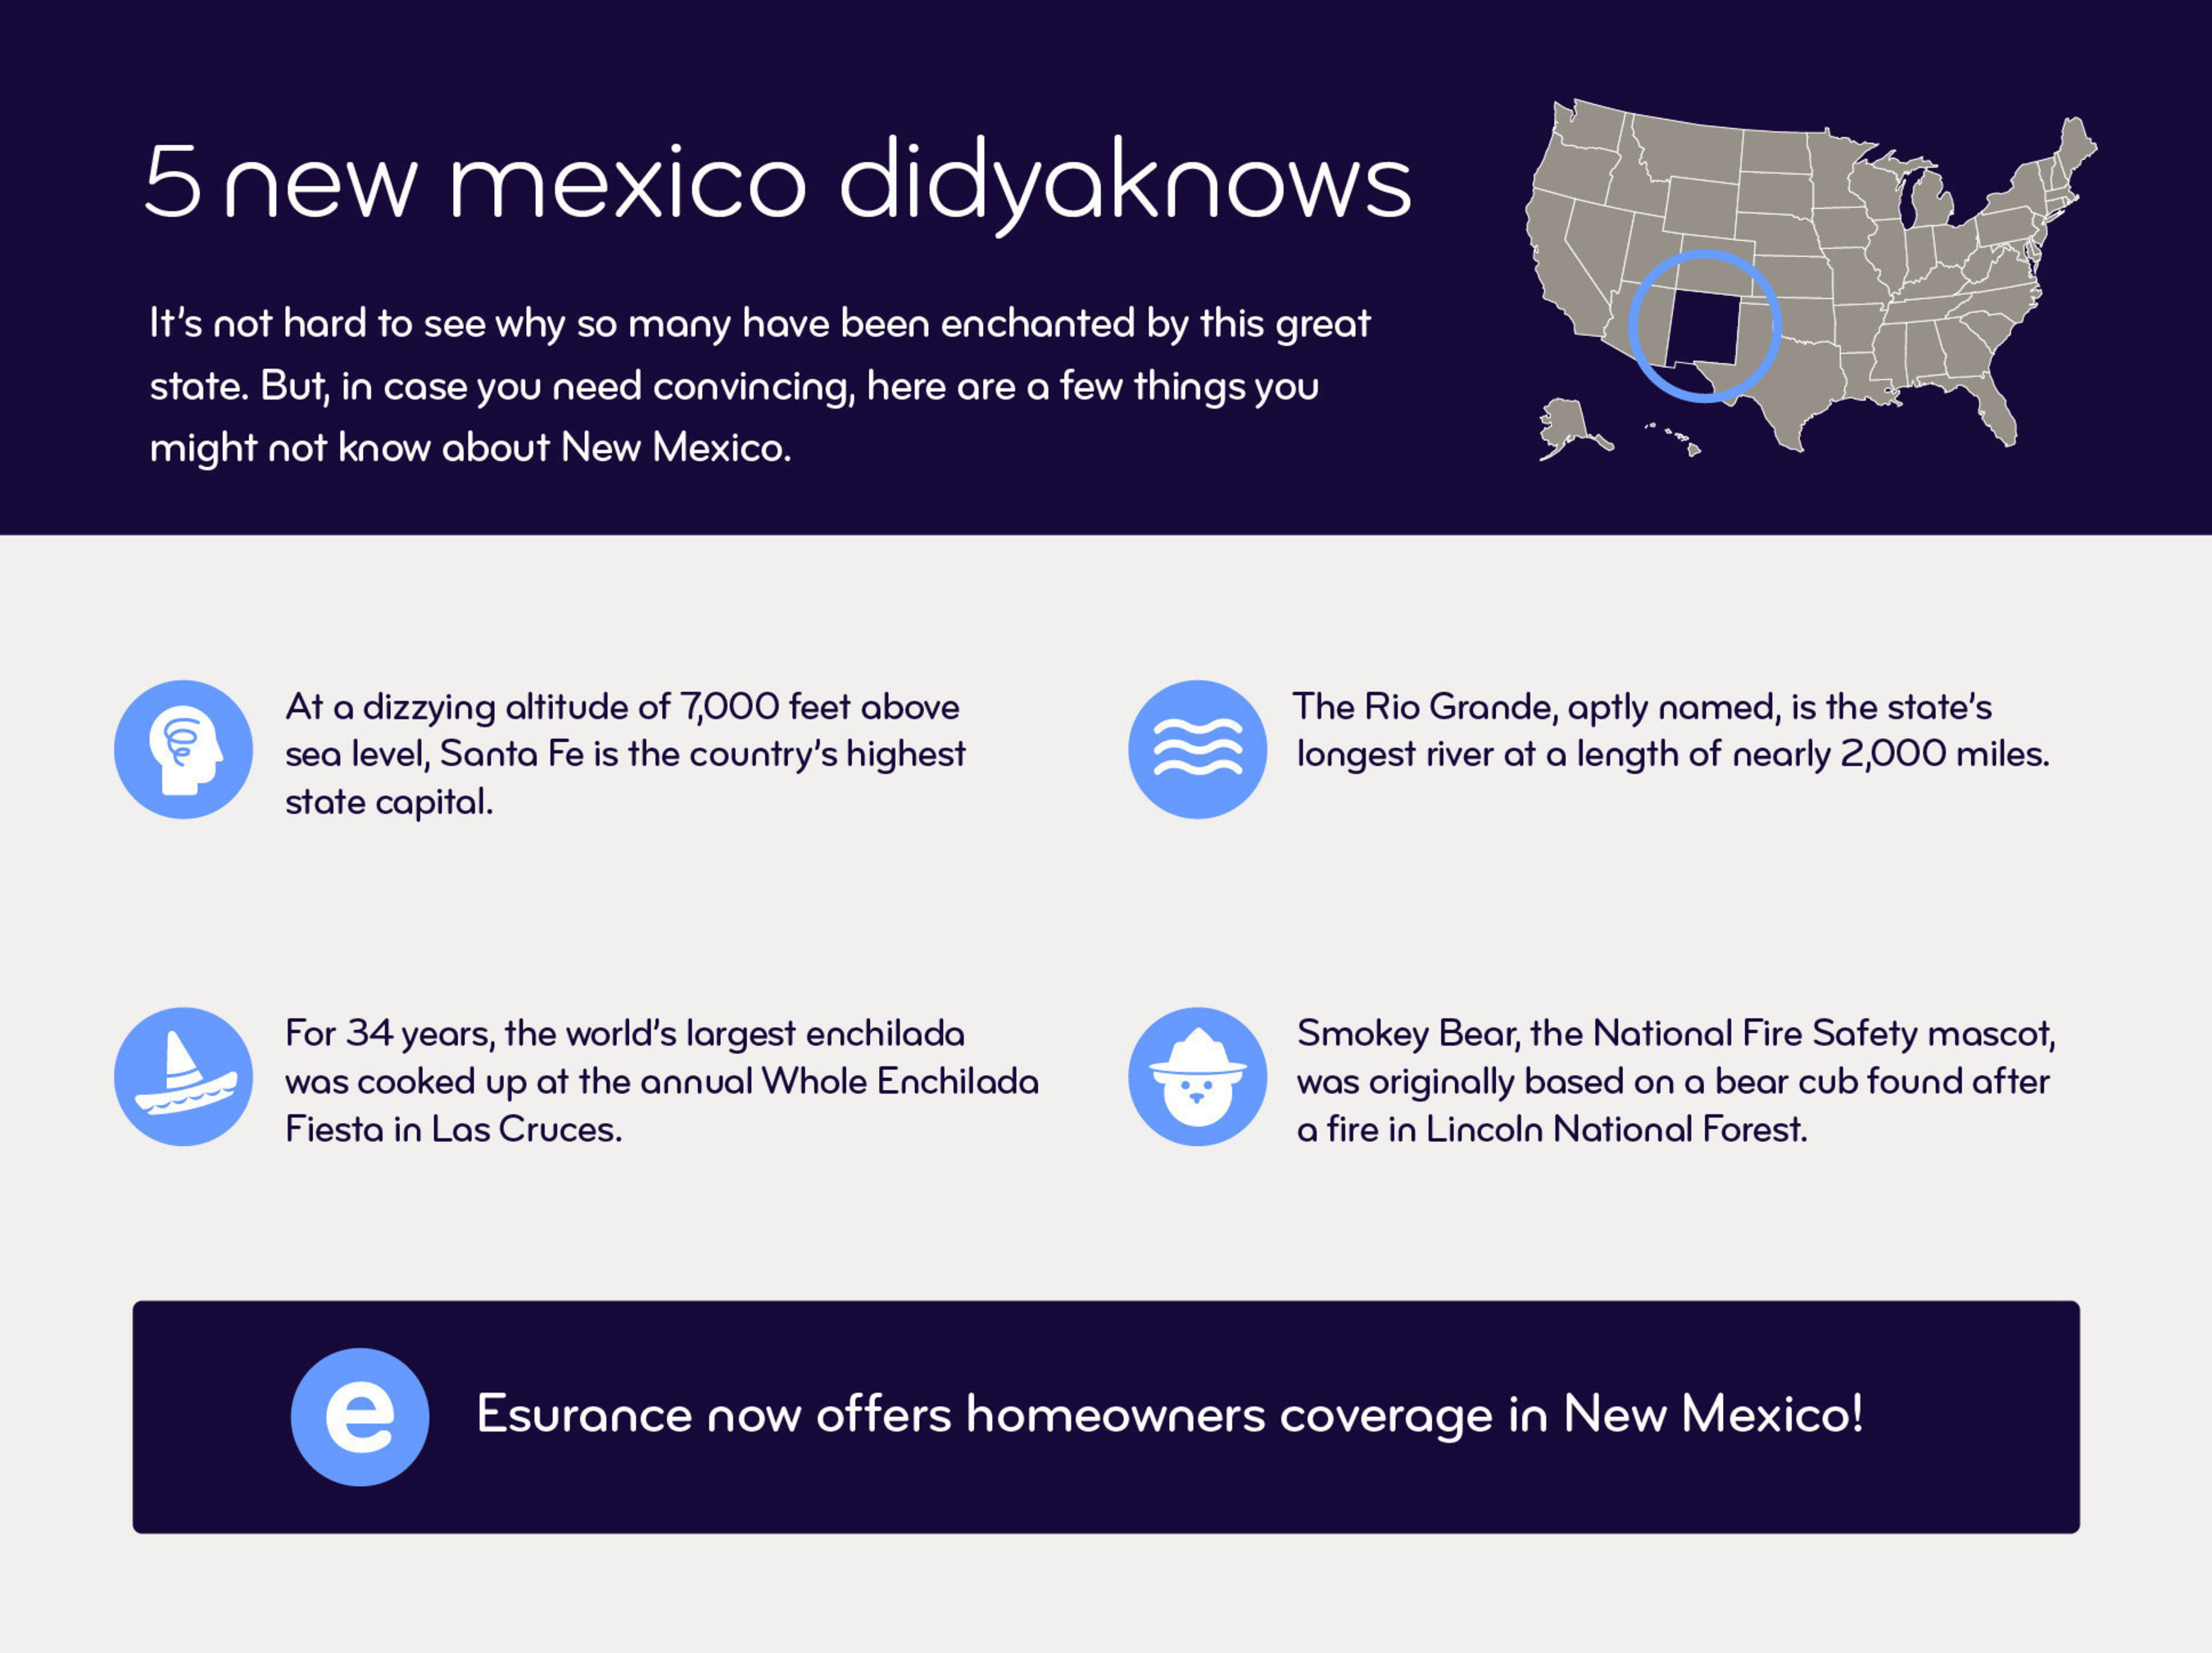 Esurance now offers home homeowners coverage in New Mexico.